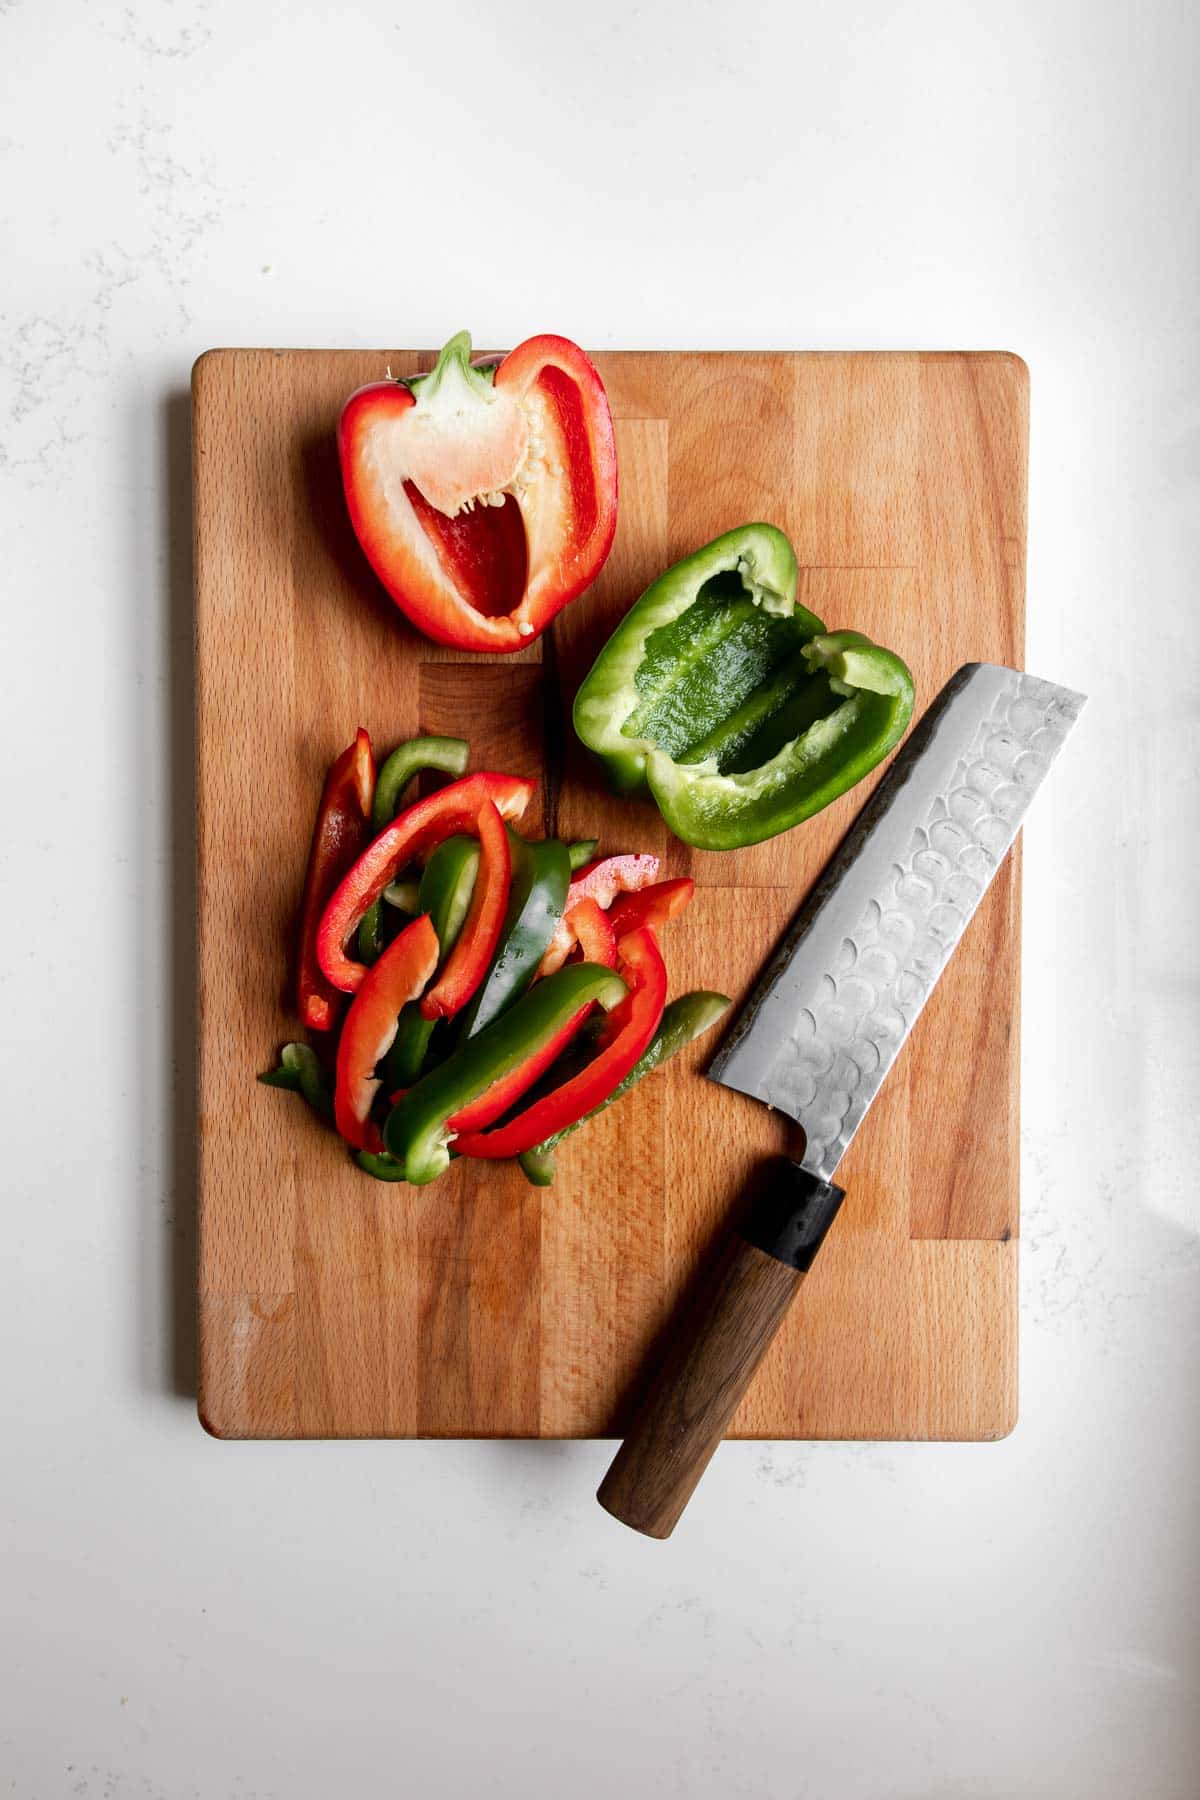 Half a red pepper, green pepper, red and green pepper slices and and Japanese knife on a wooden cutting board.